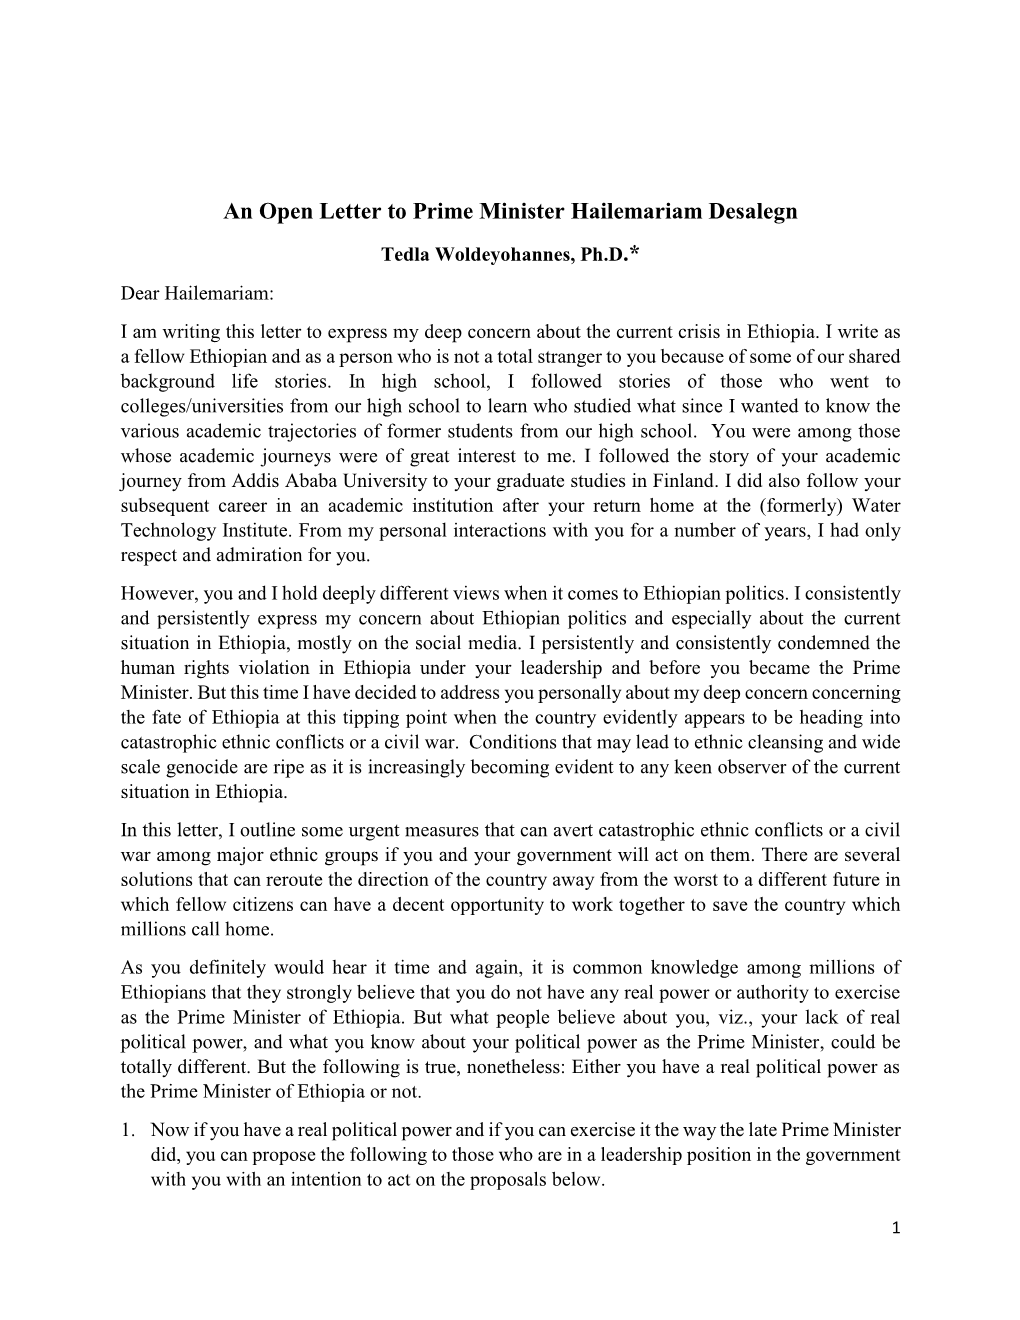 An Open Letter to Prime Minister Hailemariam Desalegn